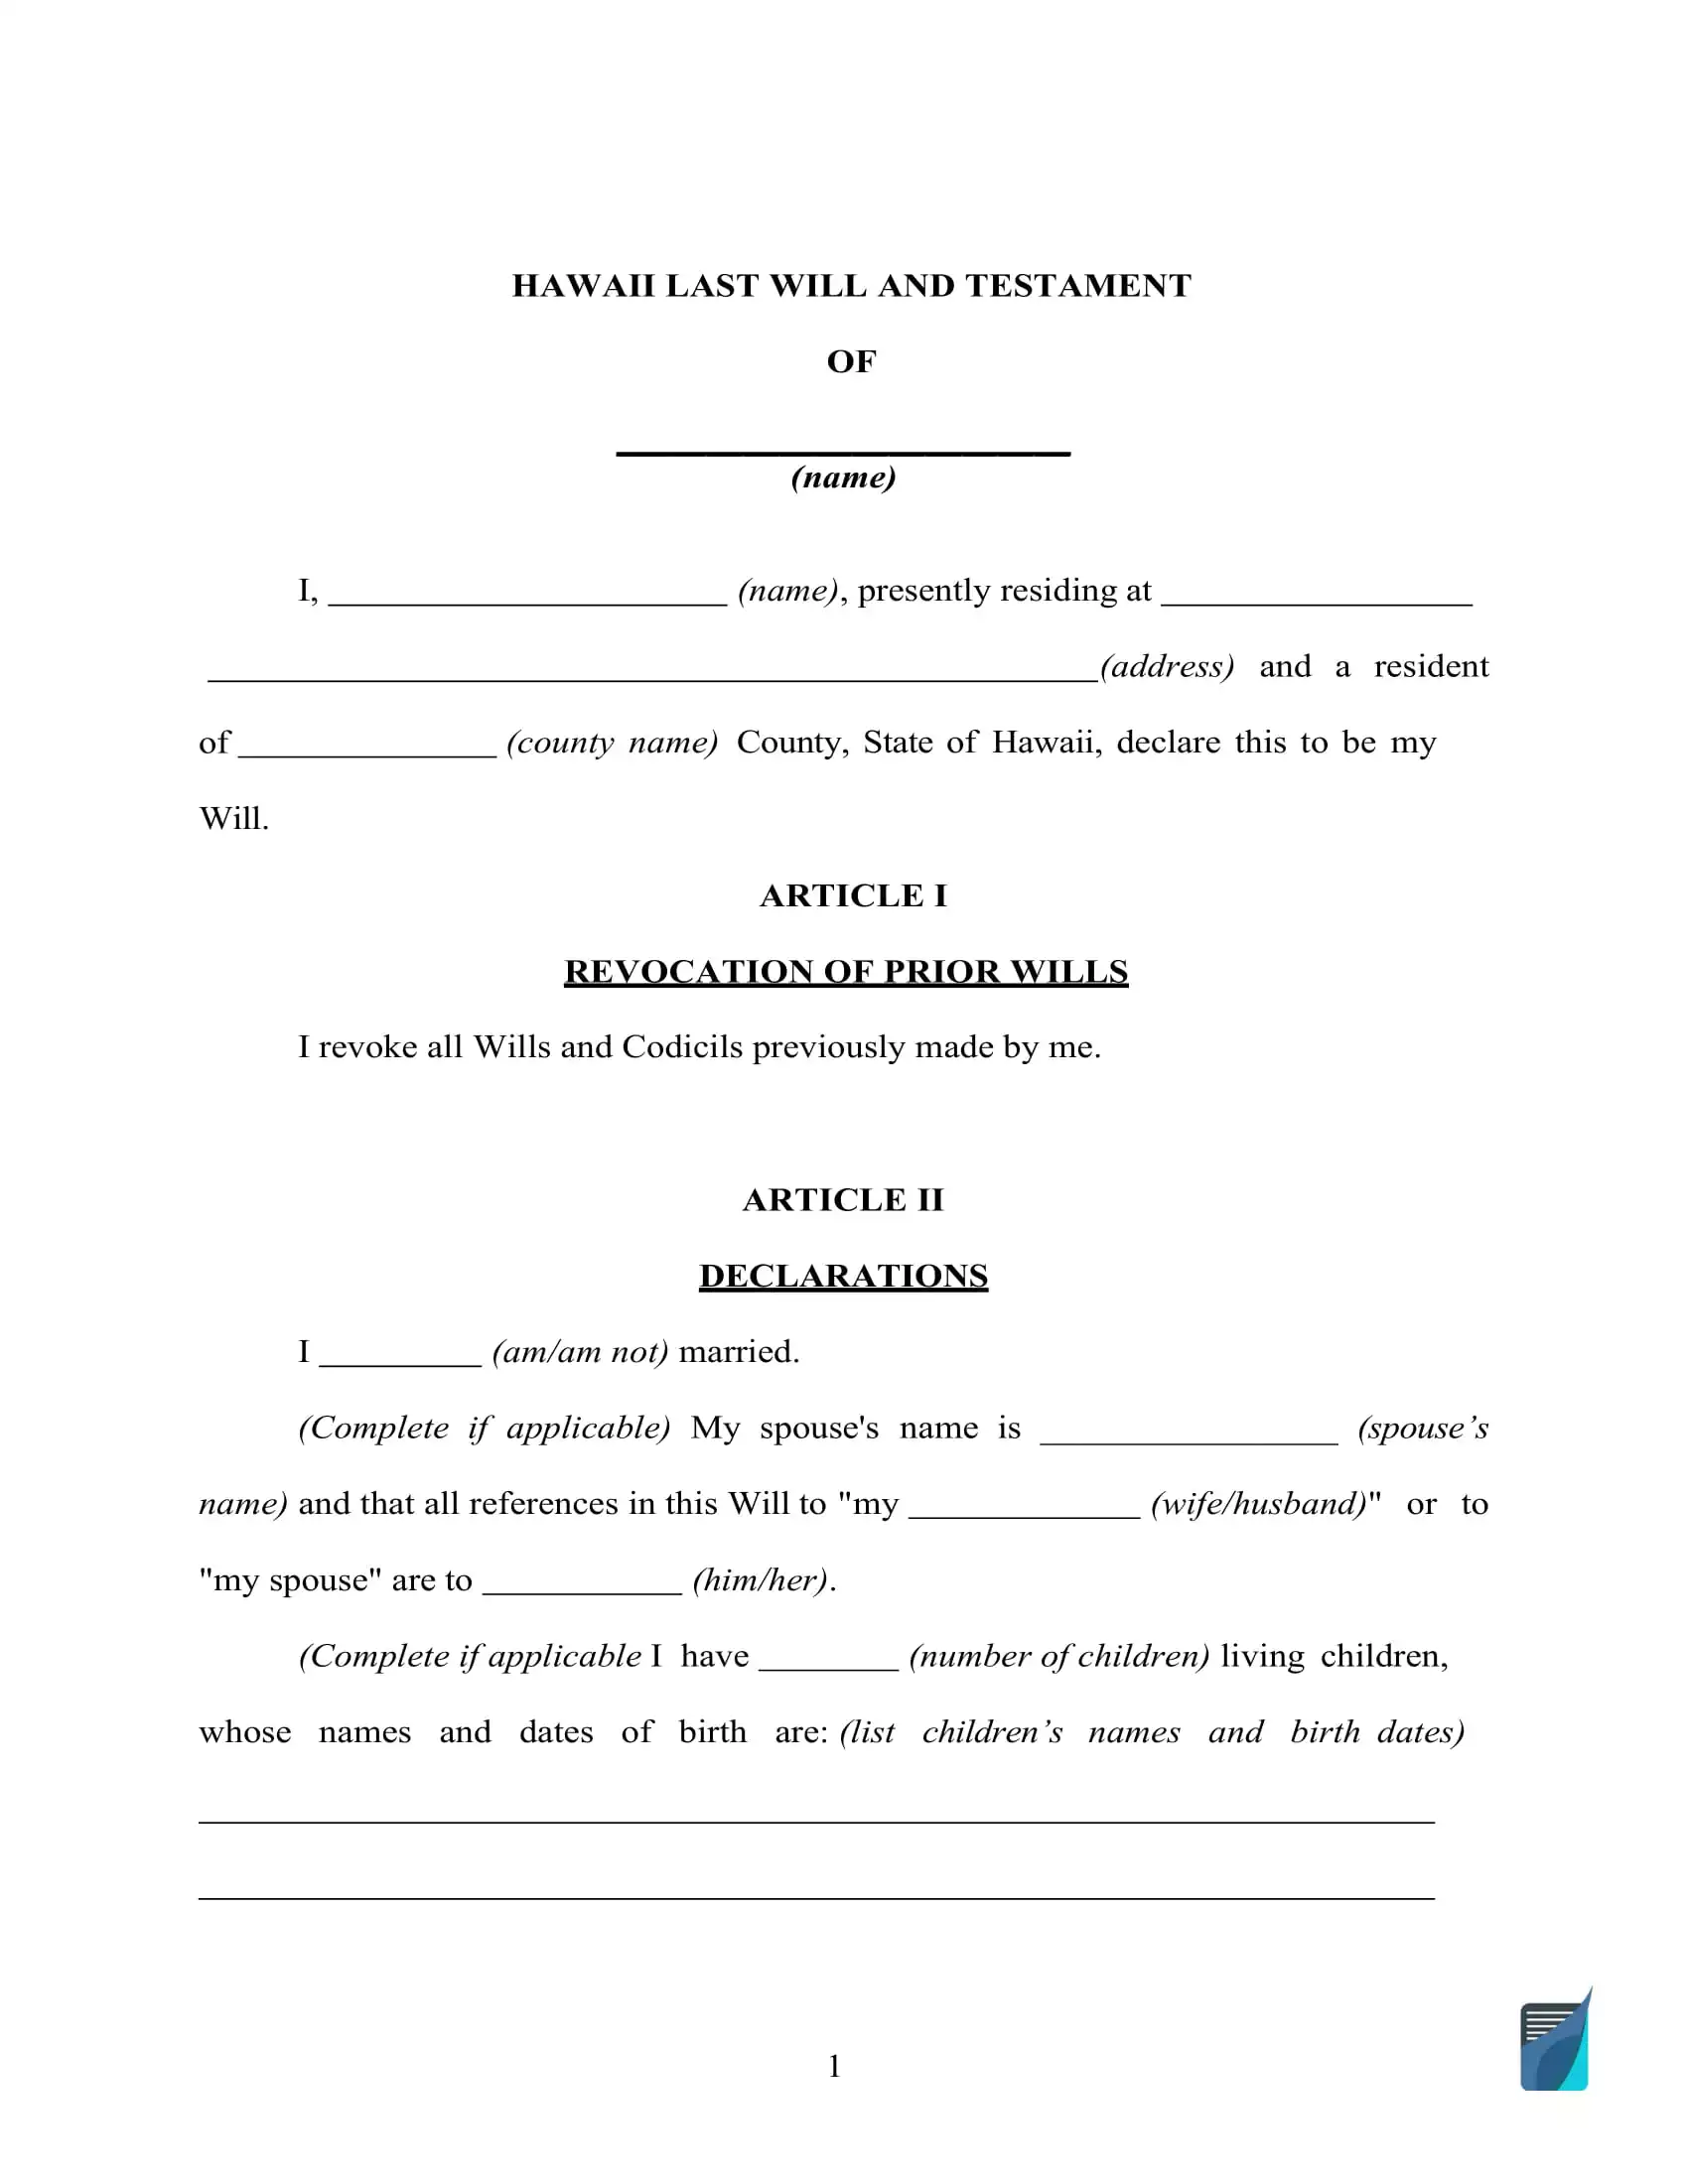 hawaii-last-will-and-testament-template